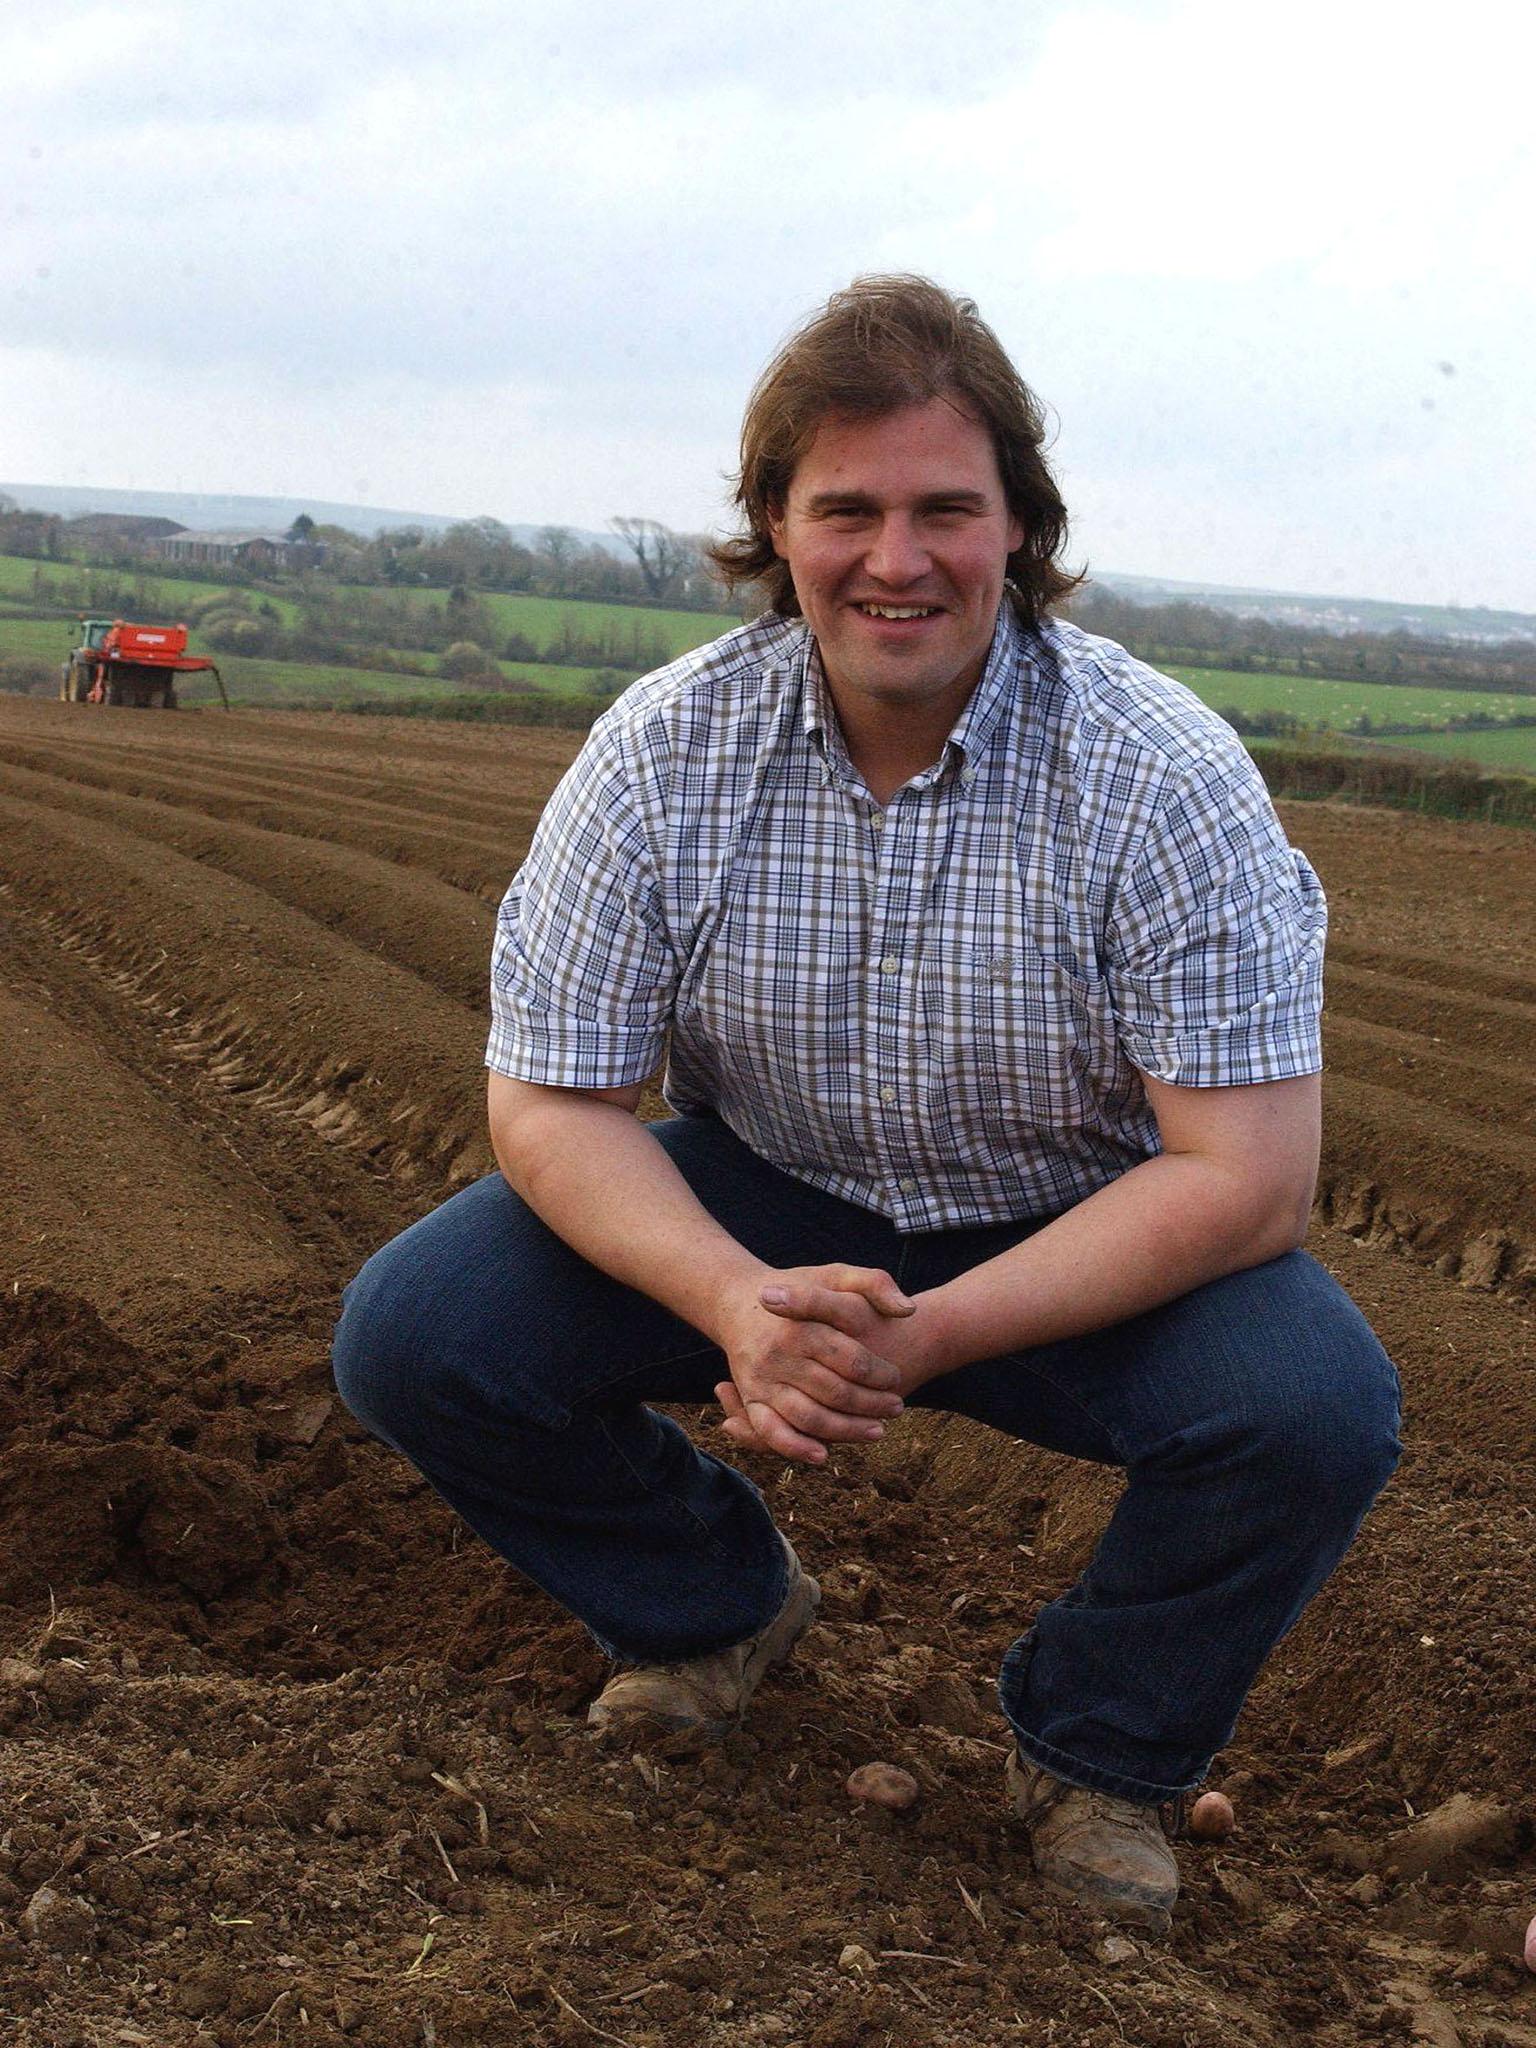 Growing potatoes is a longstanding family tradition for Joe Button (Seasonal Spuds)